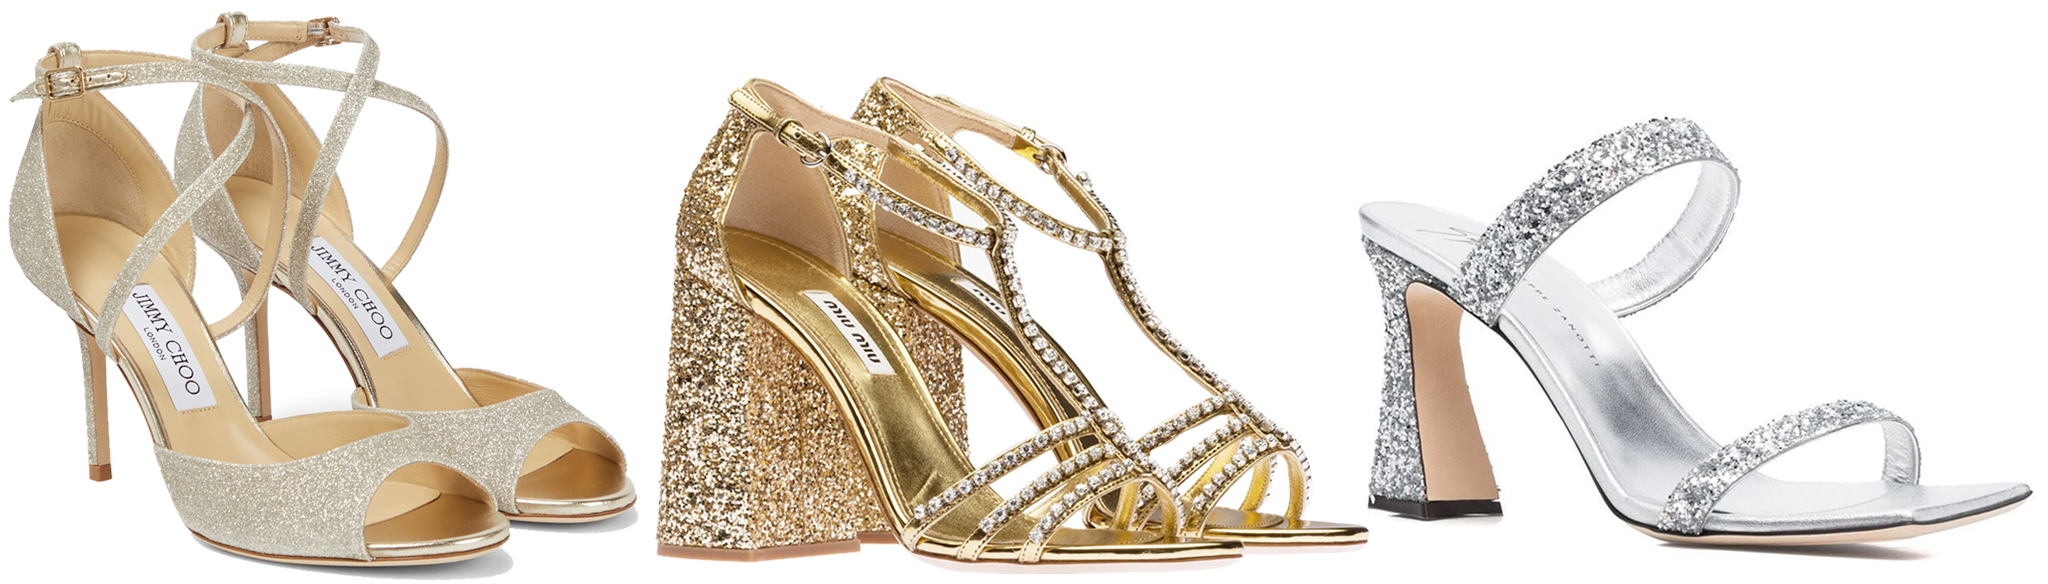 Sparkling Shoes for a Night Out: 4 Best Styles with Swarovski Crystals